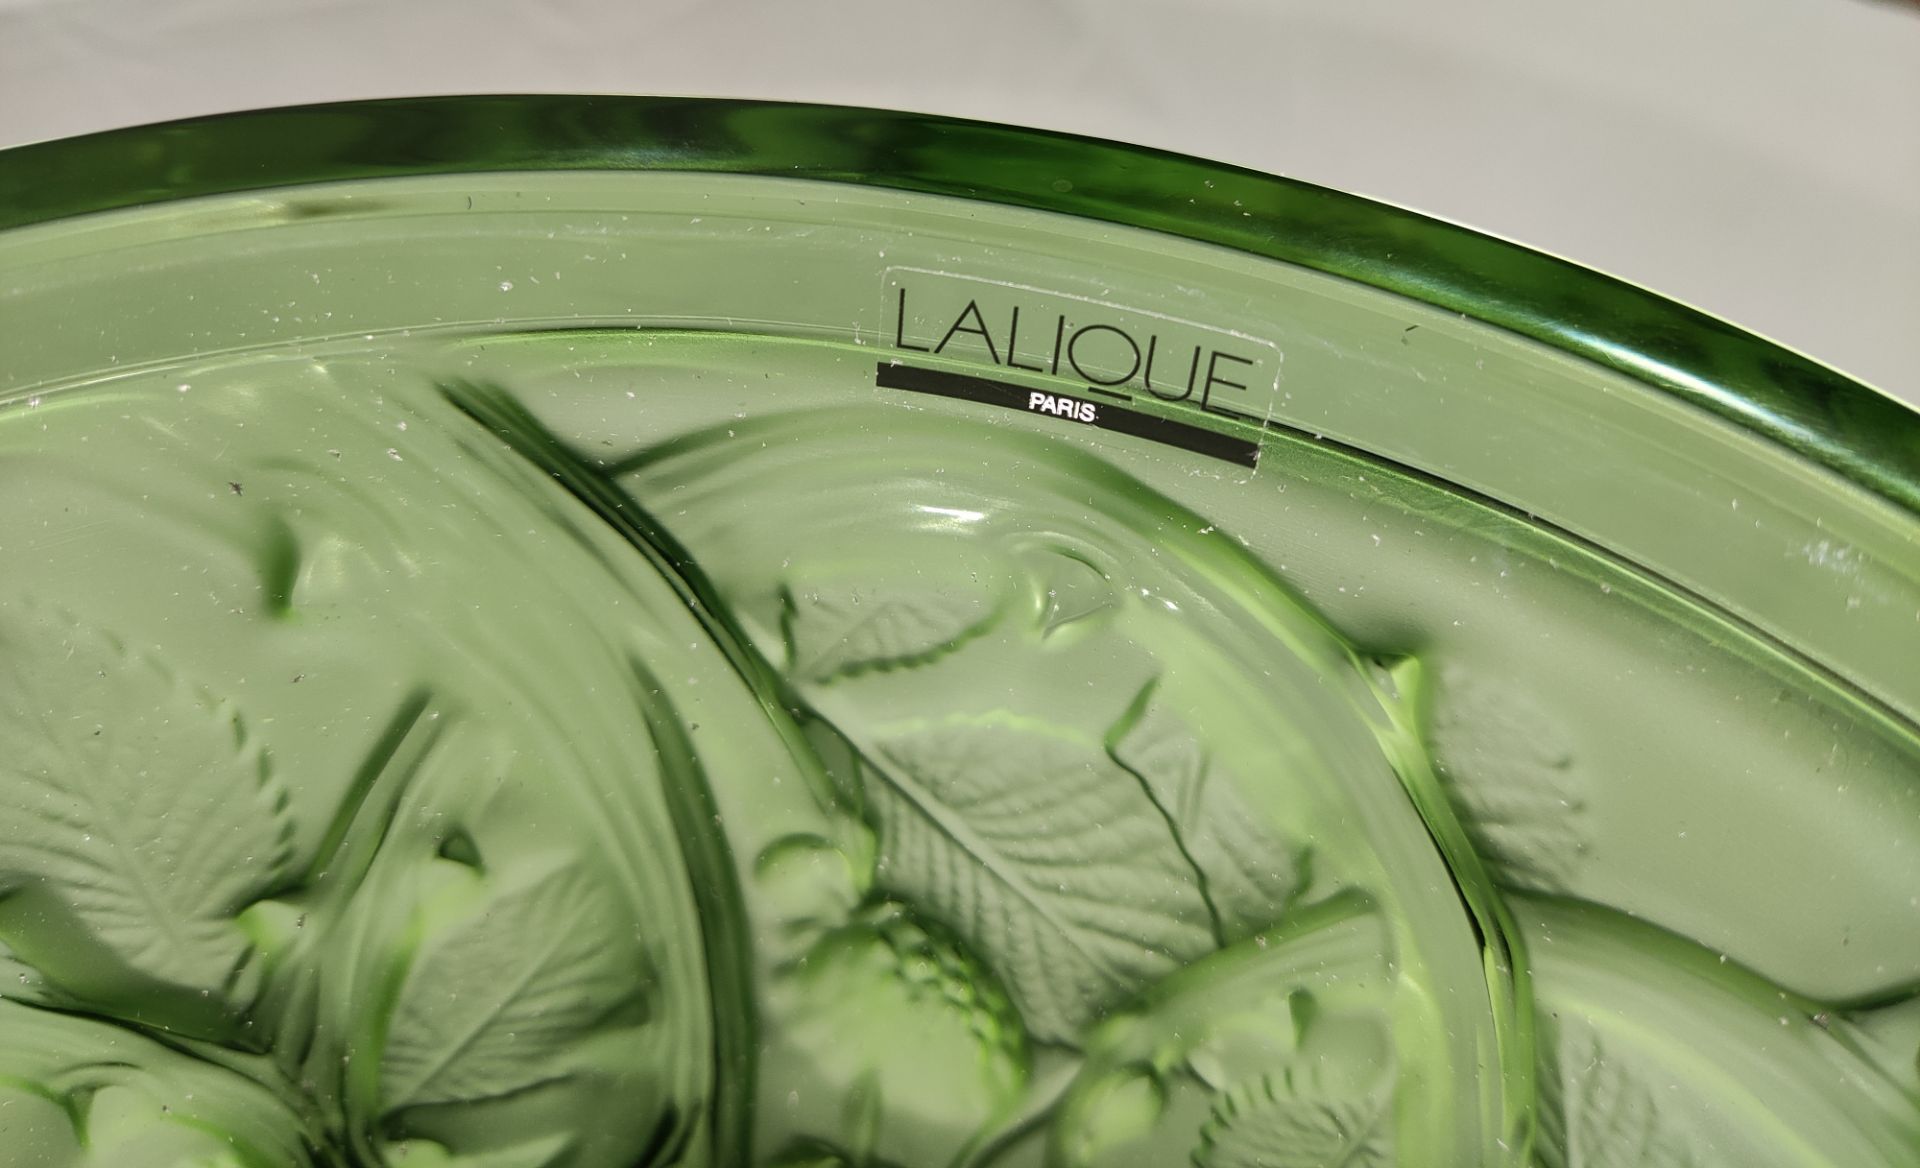 1 x LALIQUE 'Mures' Exquisite Handcrafted French Green Crystal Medium Vase - Original RRP £2,690 - Image 14 of 23